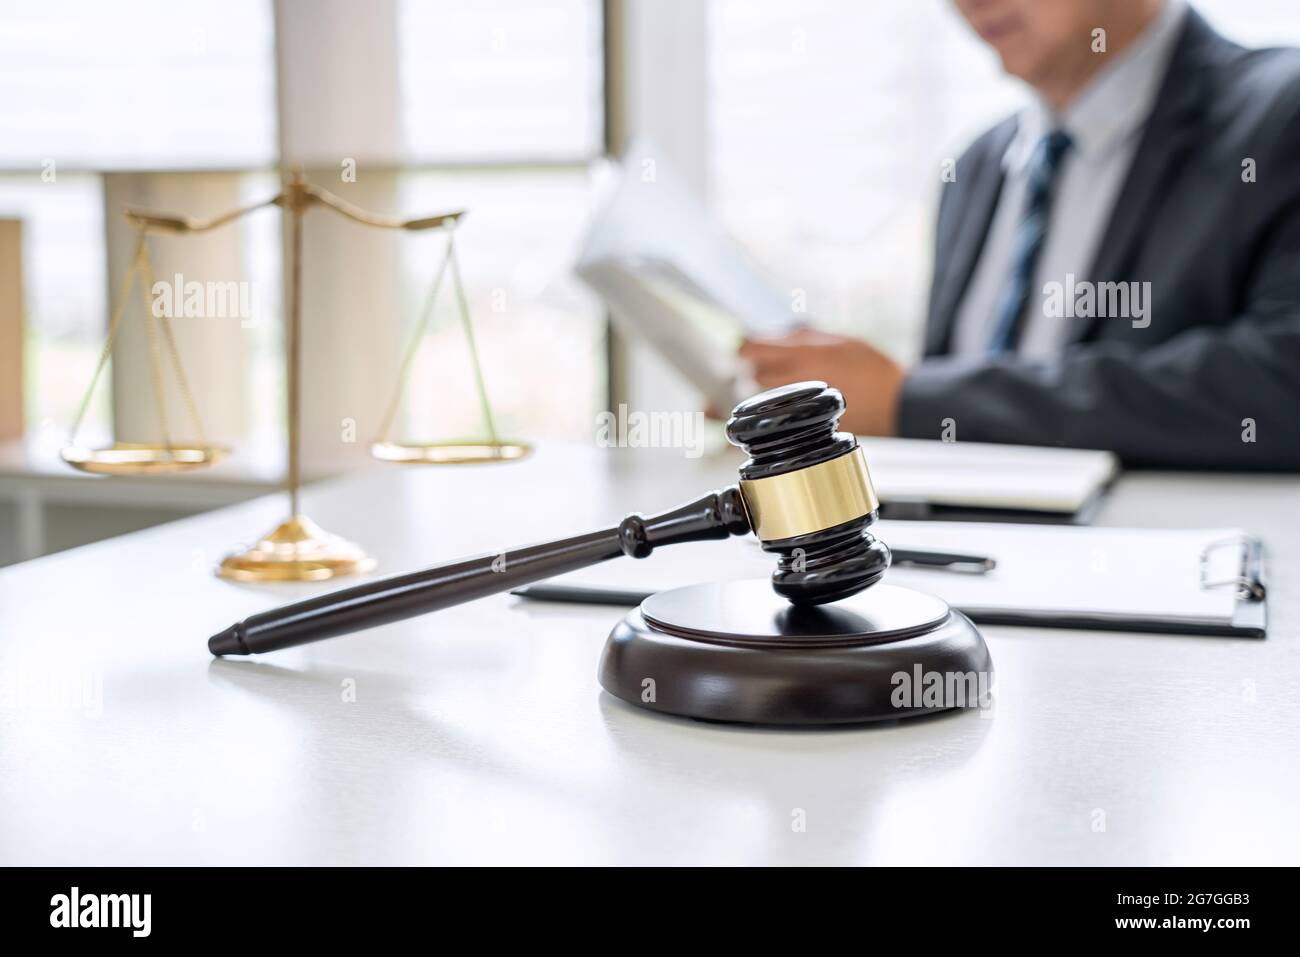 Judge gavel with Justice lawyers, Counselor in suit or lawyer working on a documents in courtroom, Legal law, advice and justice concept. Stock Photo